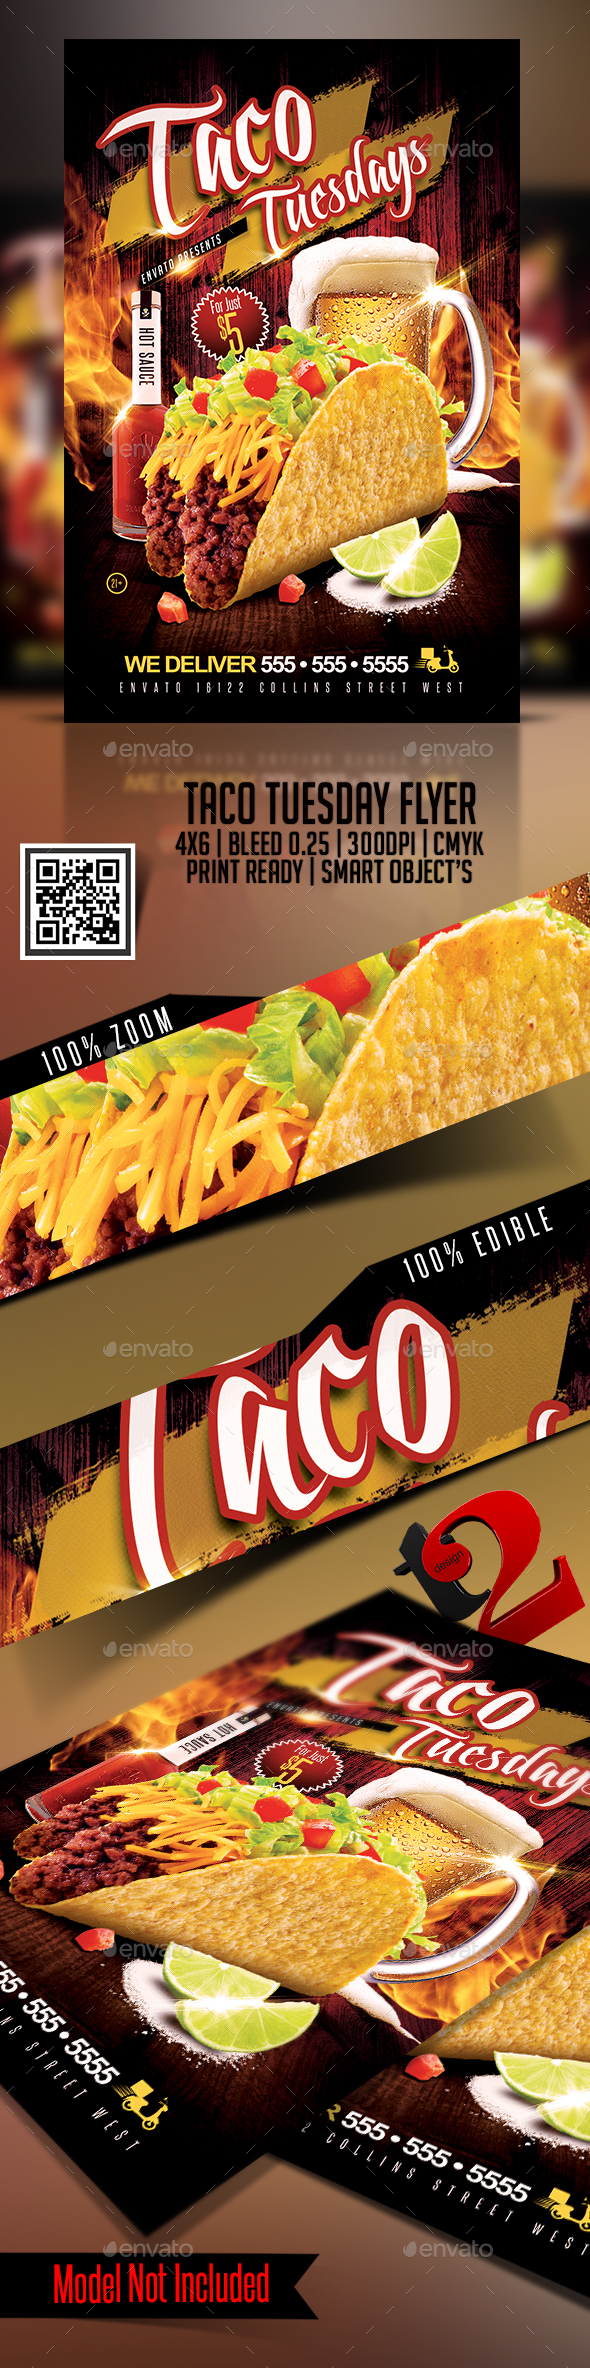 Taco Tuesday Flyer Template